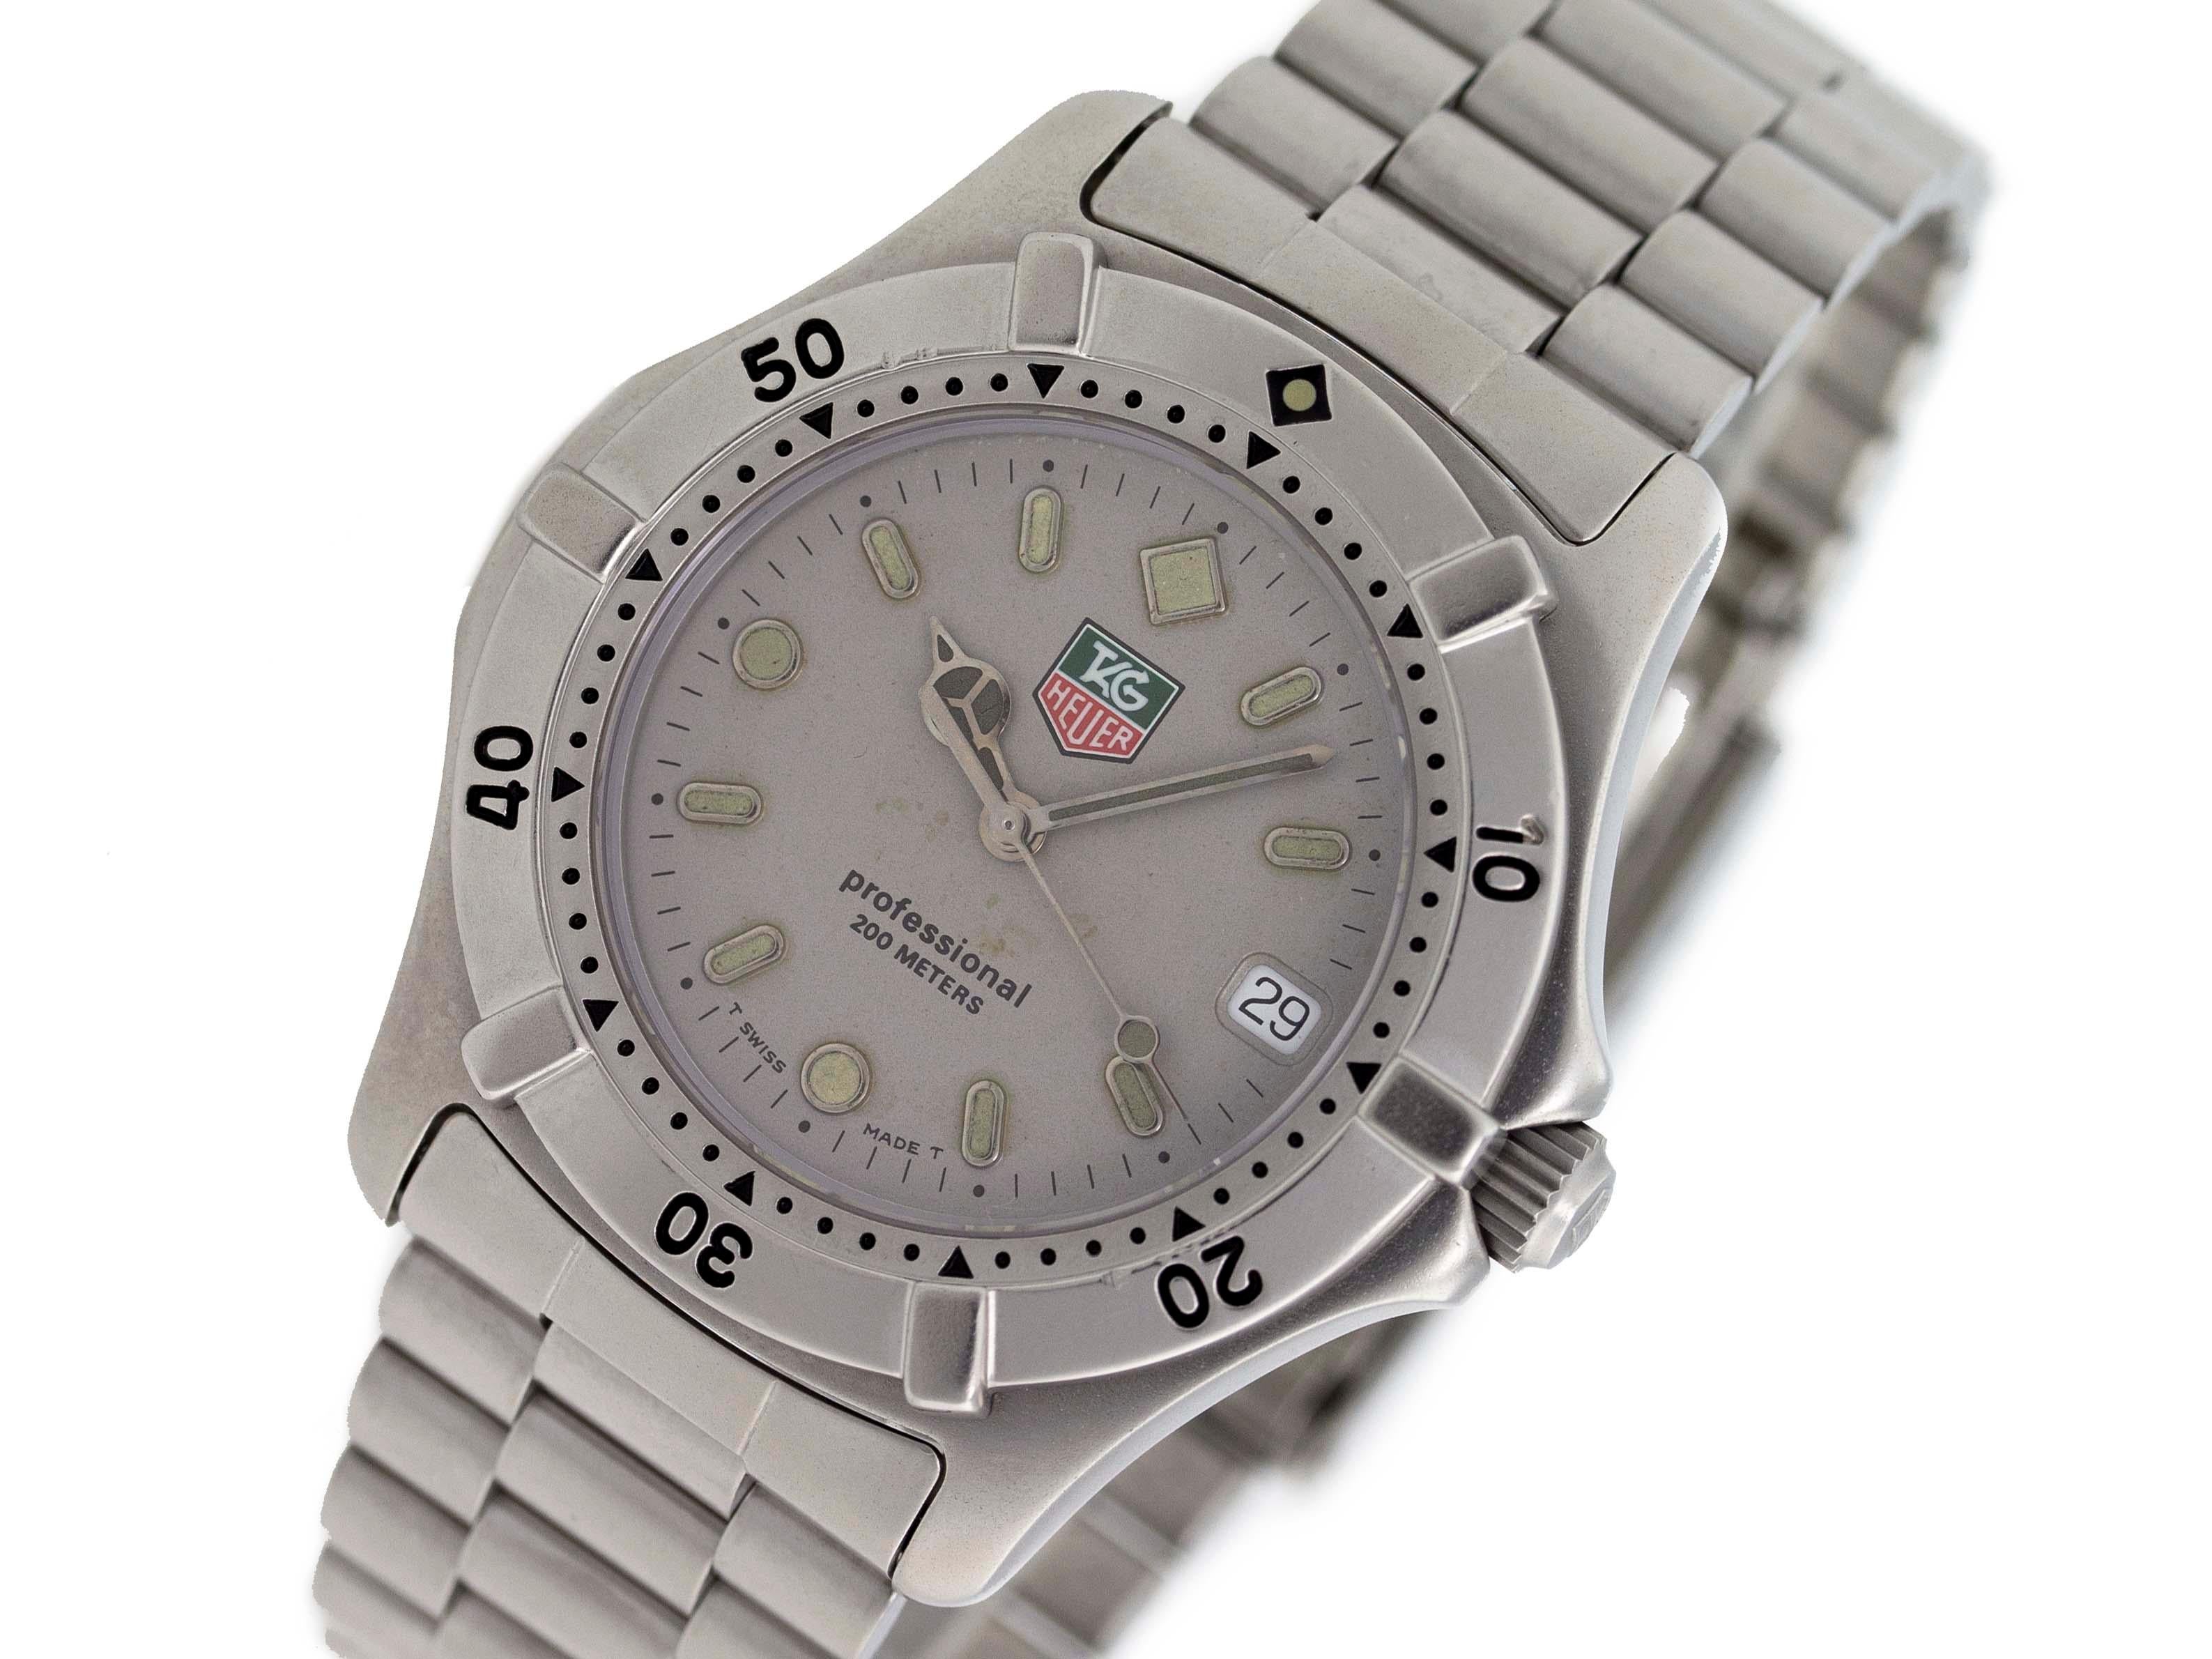 Brand: TAG Heuer
Model: 2000 Series
Reference Number WE1111
Movement: Quartz
Condition: Excellent Pre-owned
Box/Papers: Box
Band Type Stainless Steel Bracelet
Band Length: 7 Inches
Case Size: 37MM
Case Material: Stainless Steel
Dial Grey